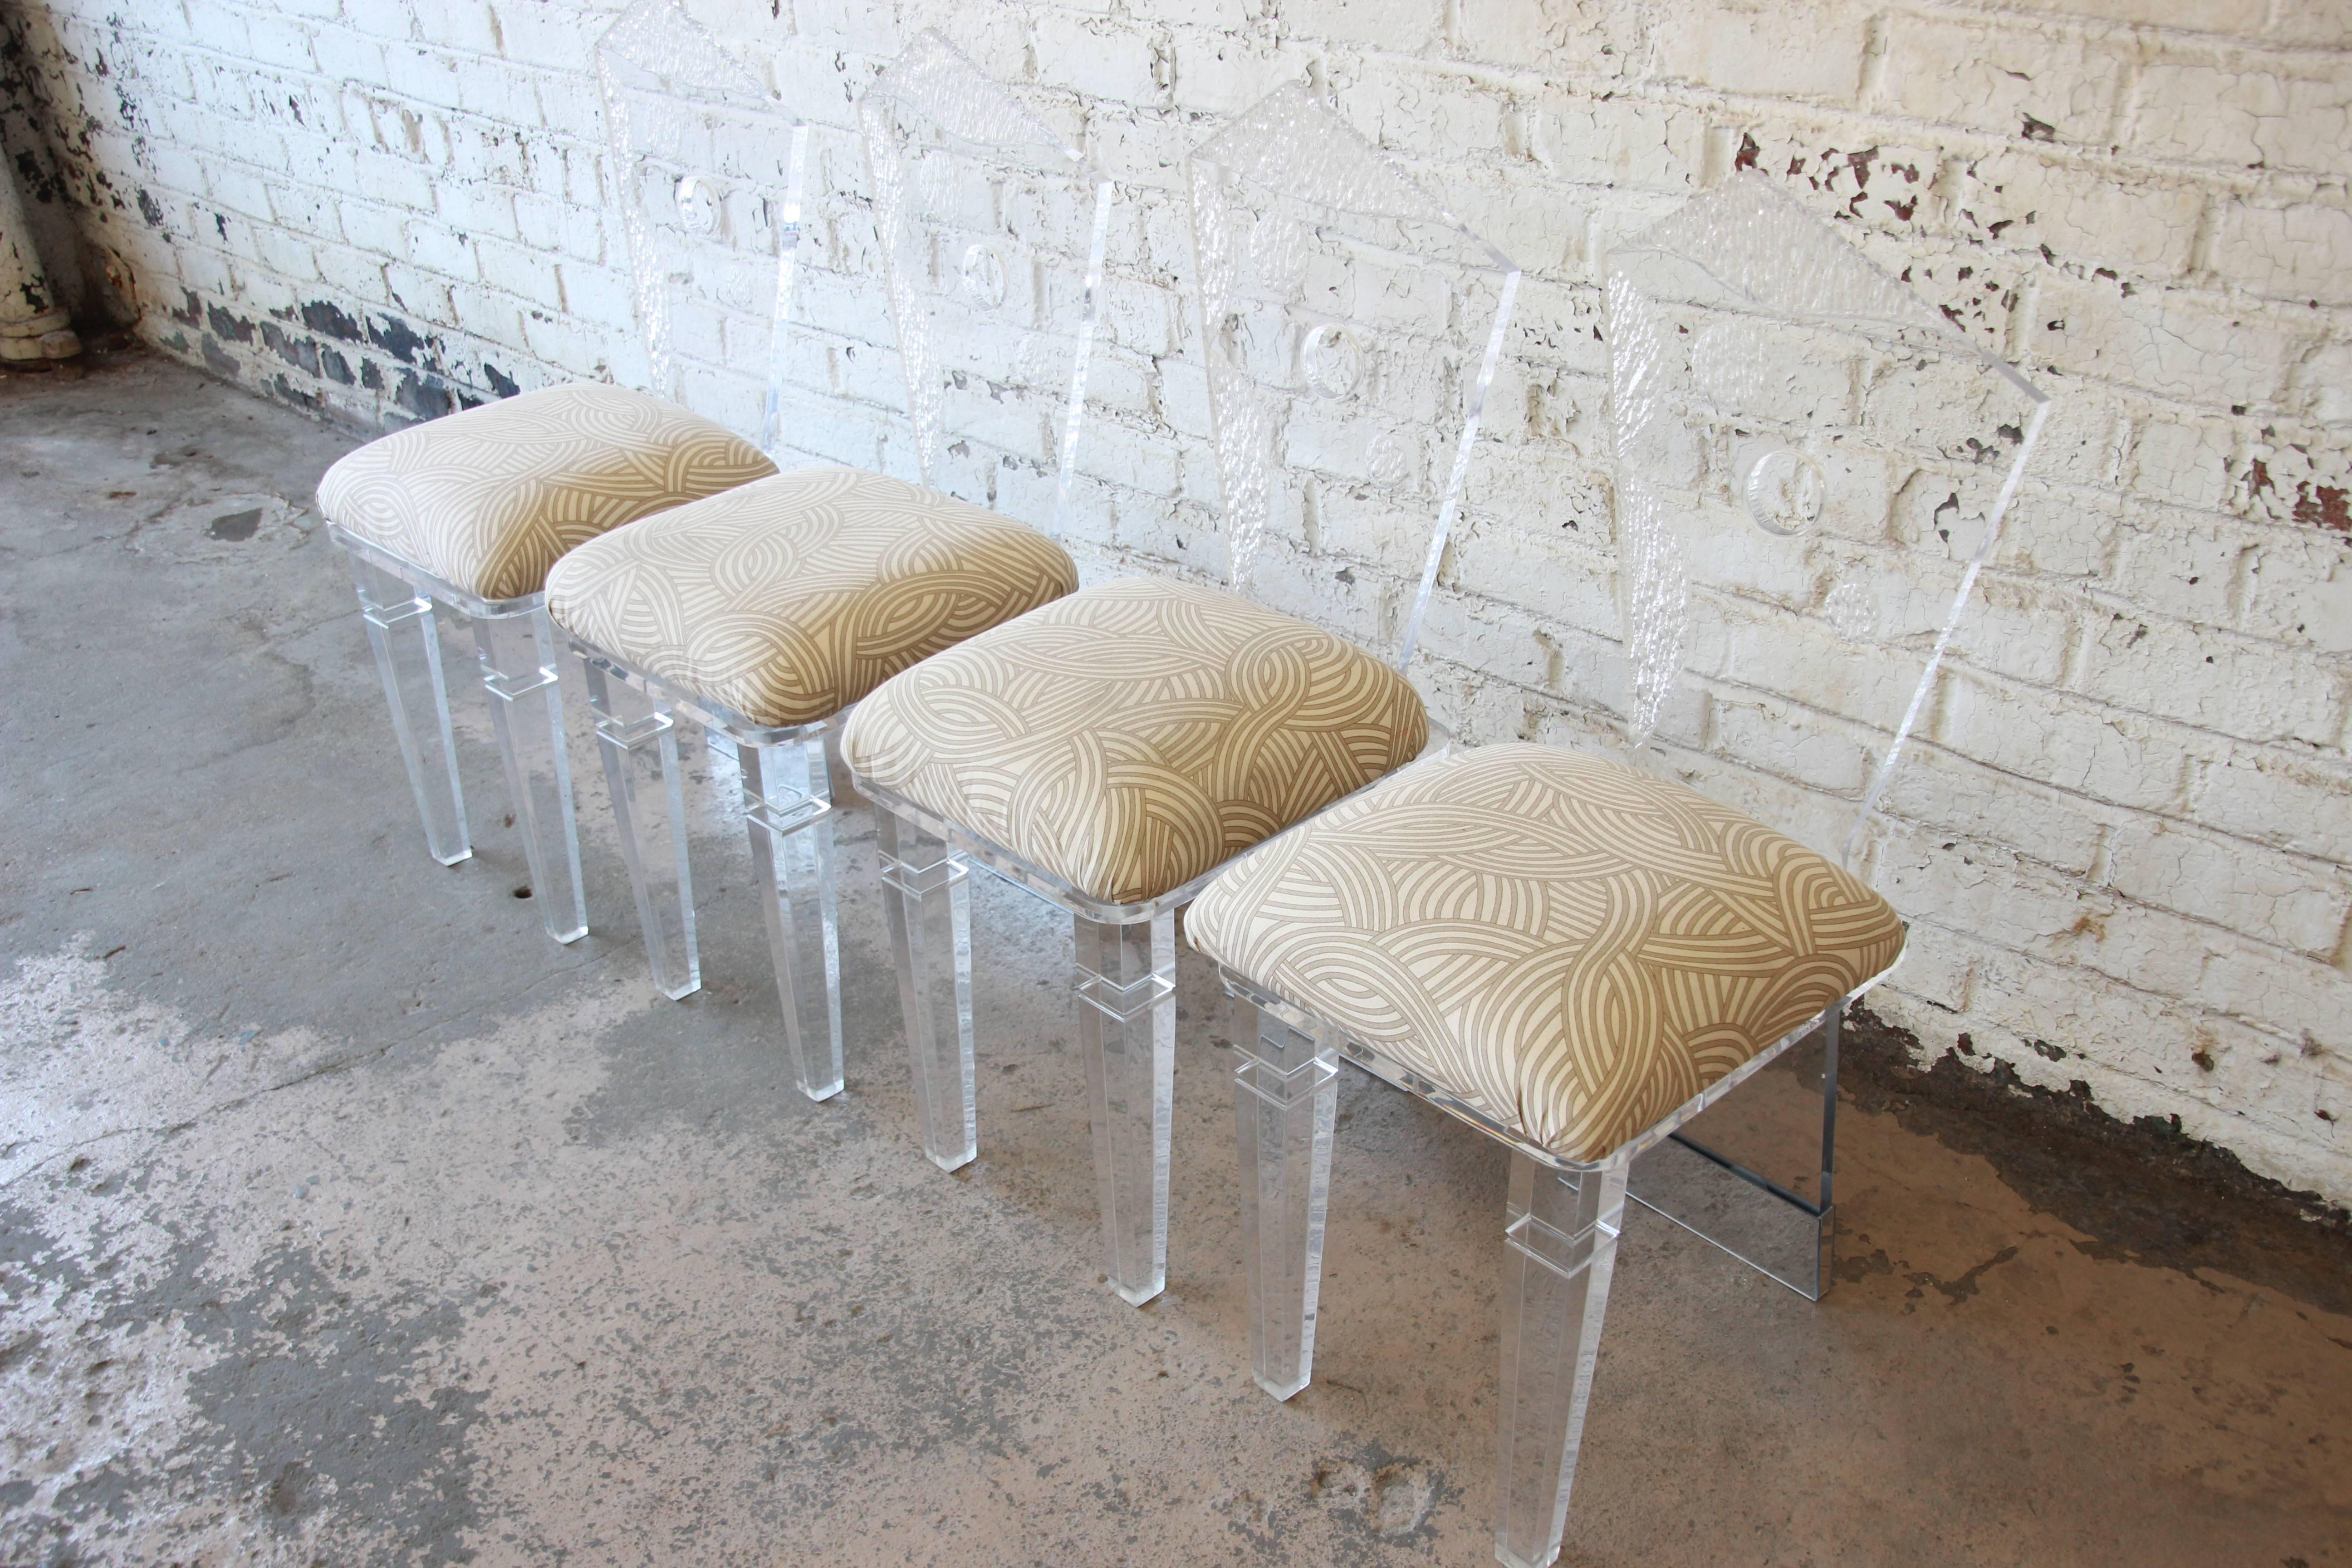 A very unique set of four Postmodern Lucite dining chairs. The chairs feature a unique abstract geometric design. The base at the back is mirrored. They chairs have been reupholstered in tan and cream upholstery. They are solid, sturdy, and in good